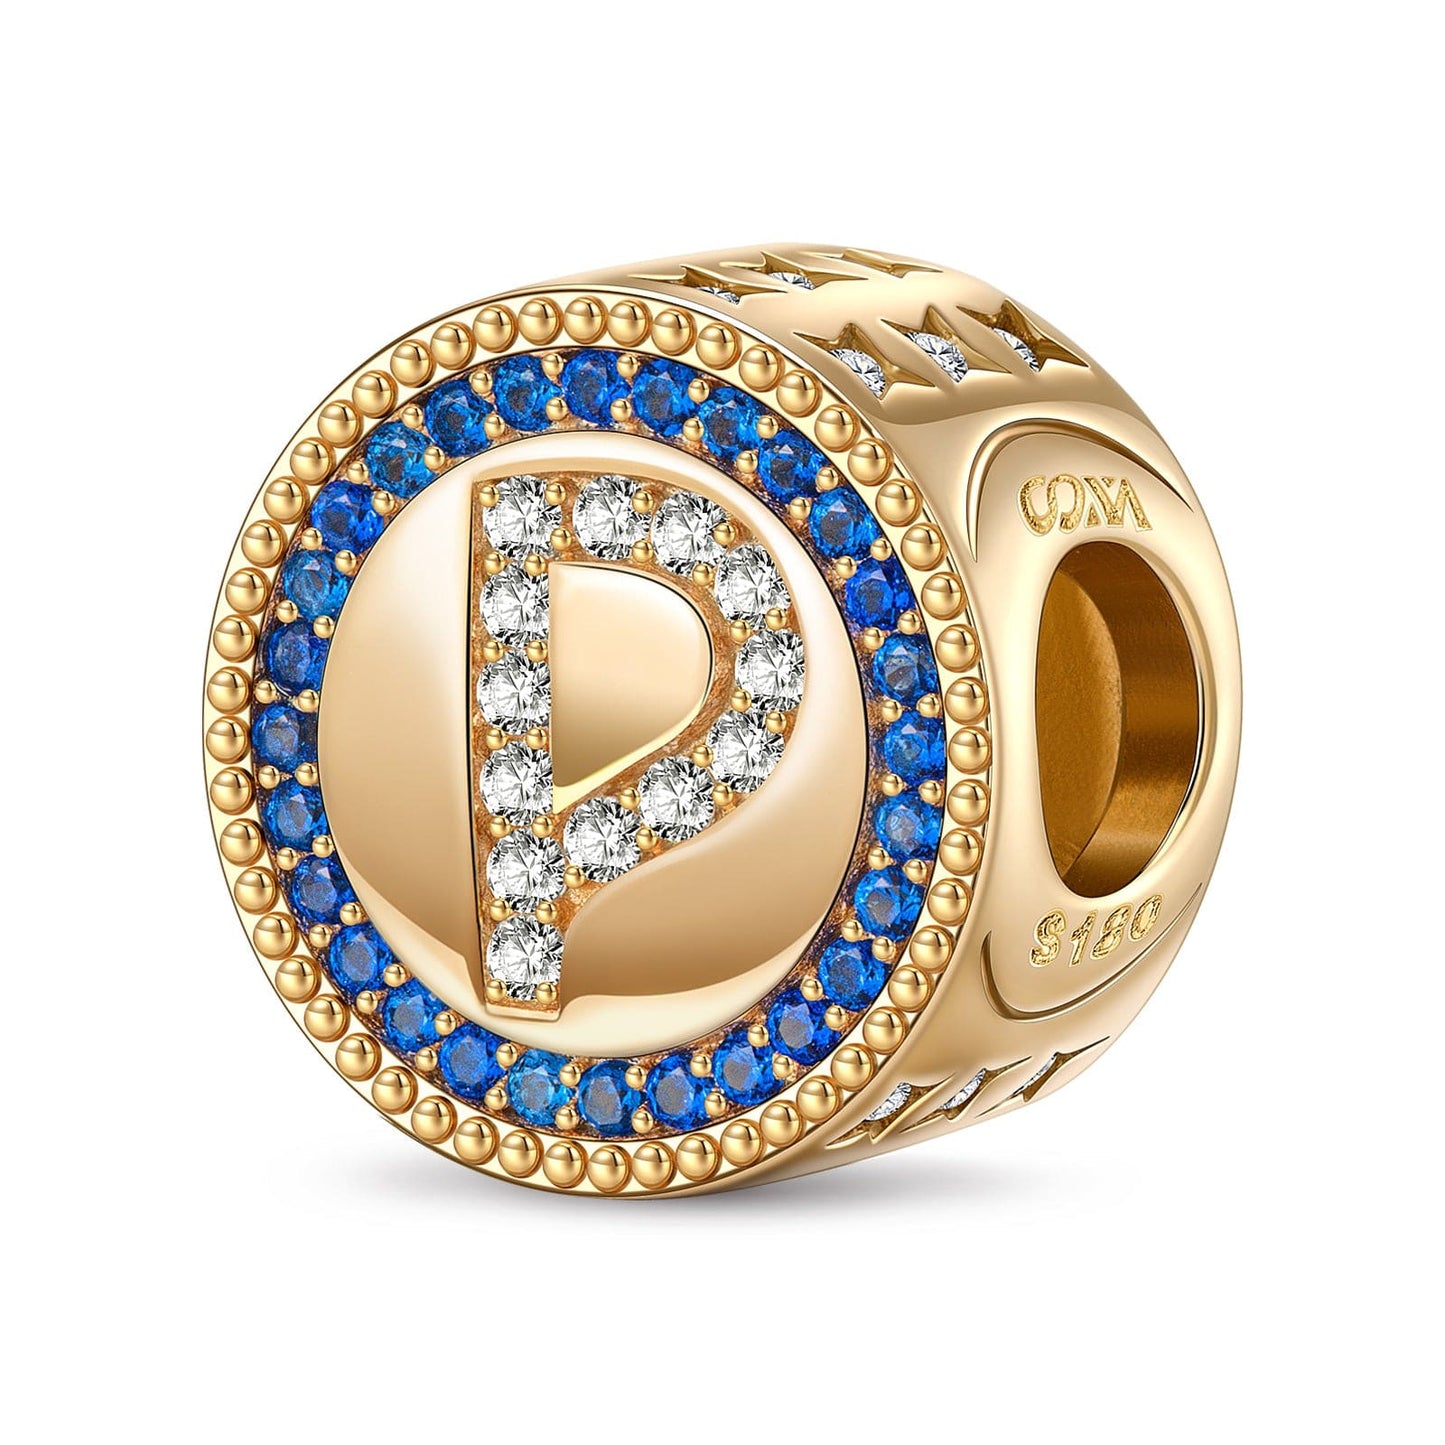 Paris: A New Age - Letter P Tarnish-resistant Silver Charms In 14K Gold Plated